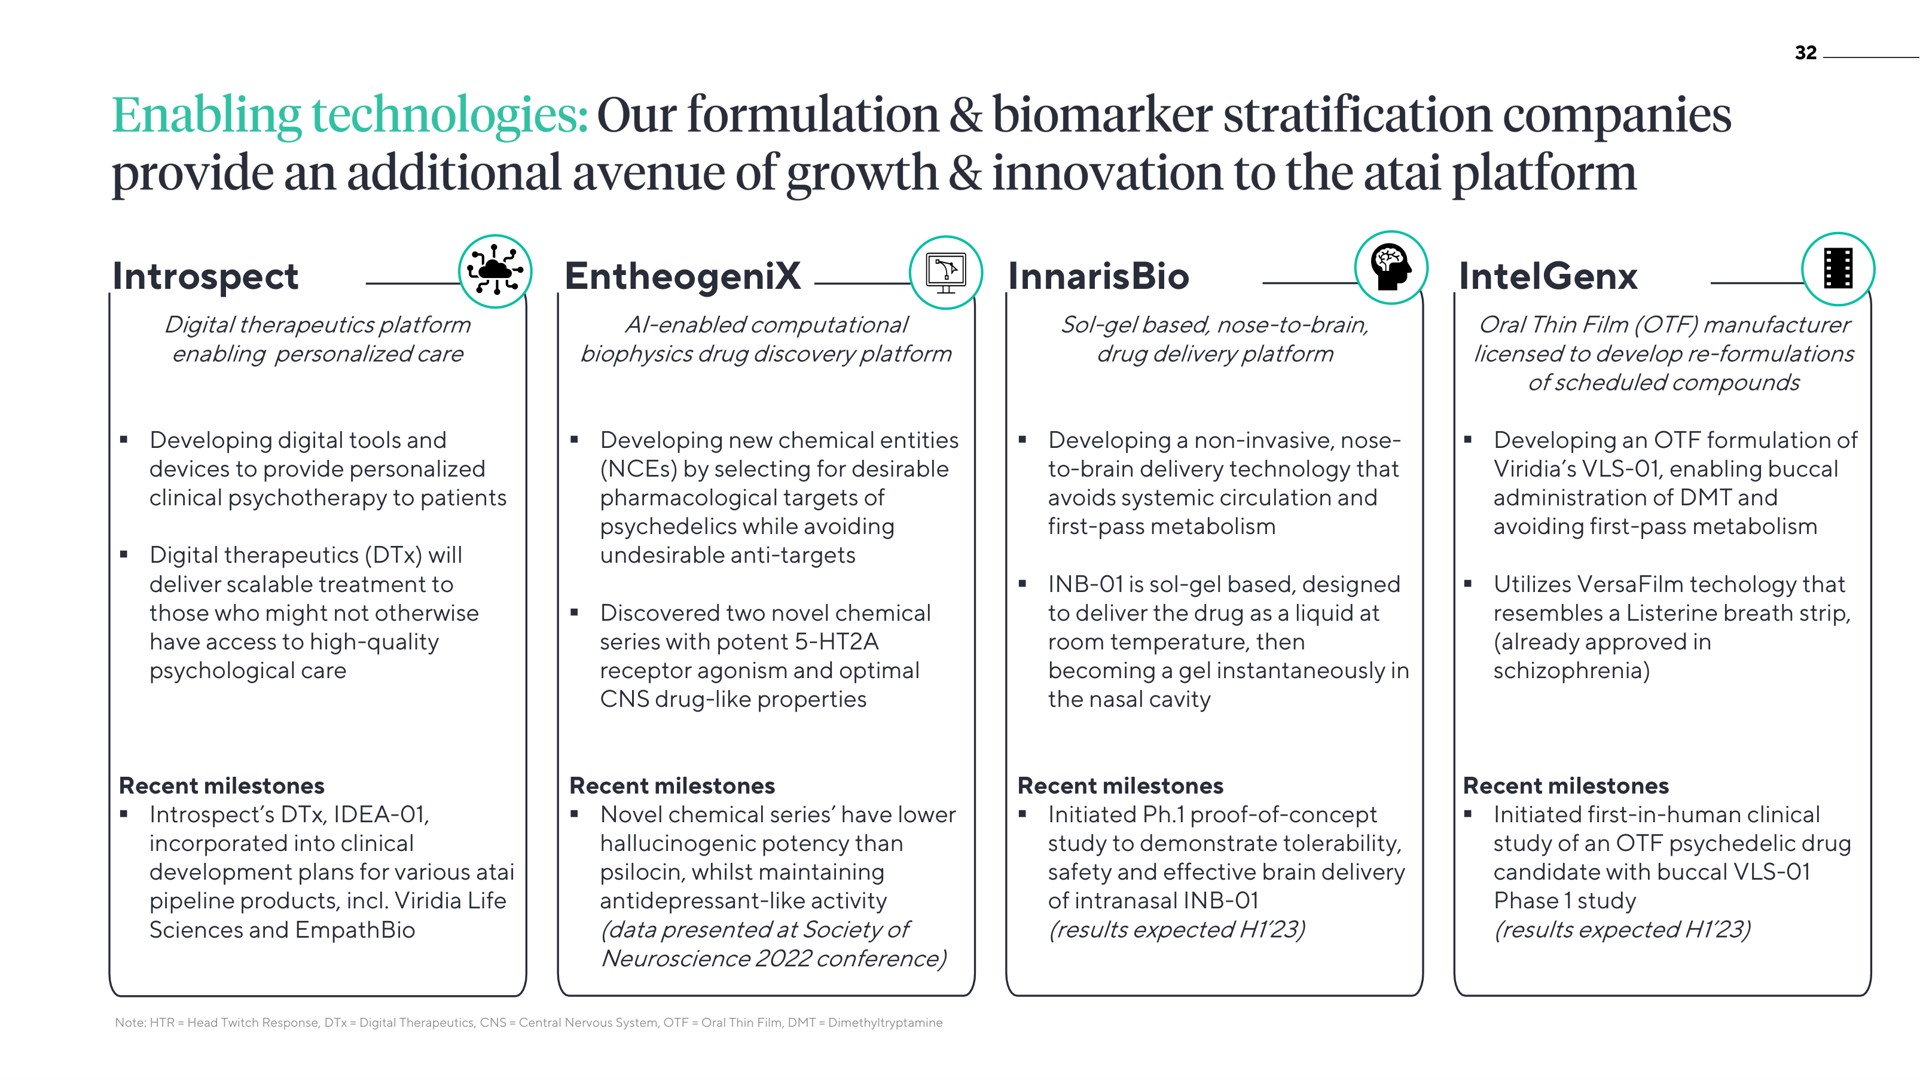 introspect enabling technologies our formulation stratification companies provide an additional avenue of growth innovation to the platform | ATAI